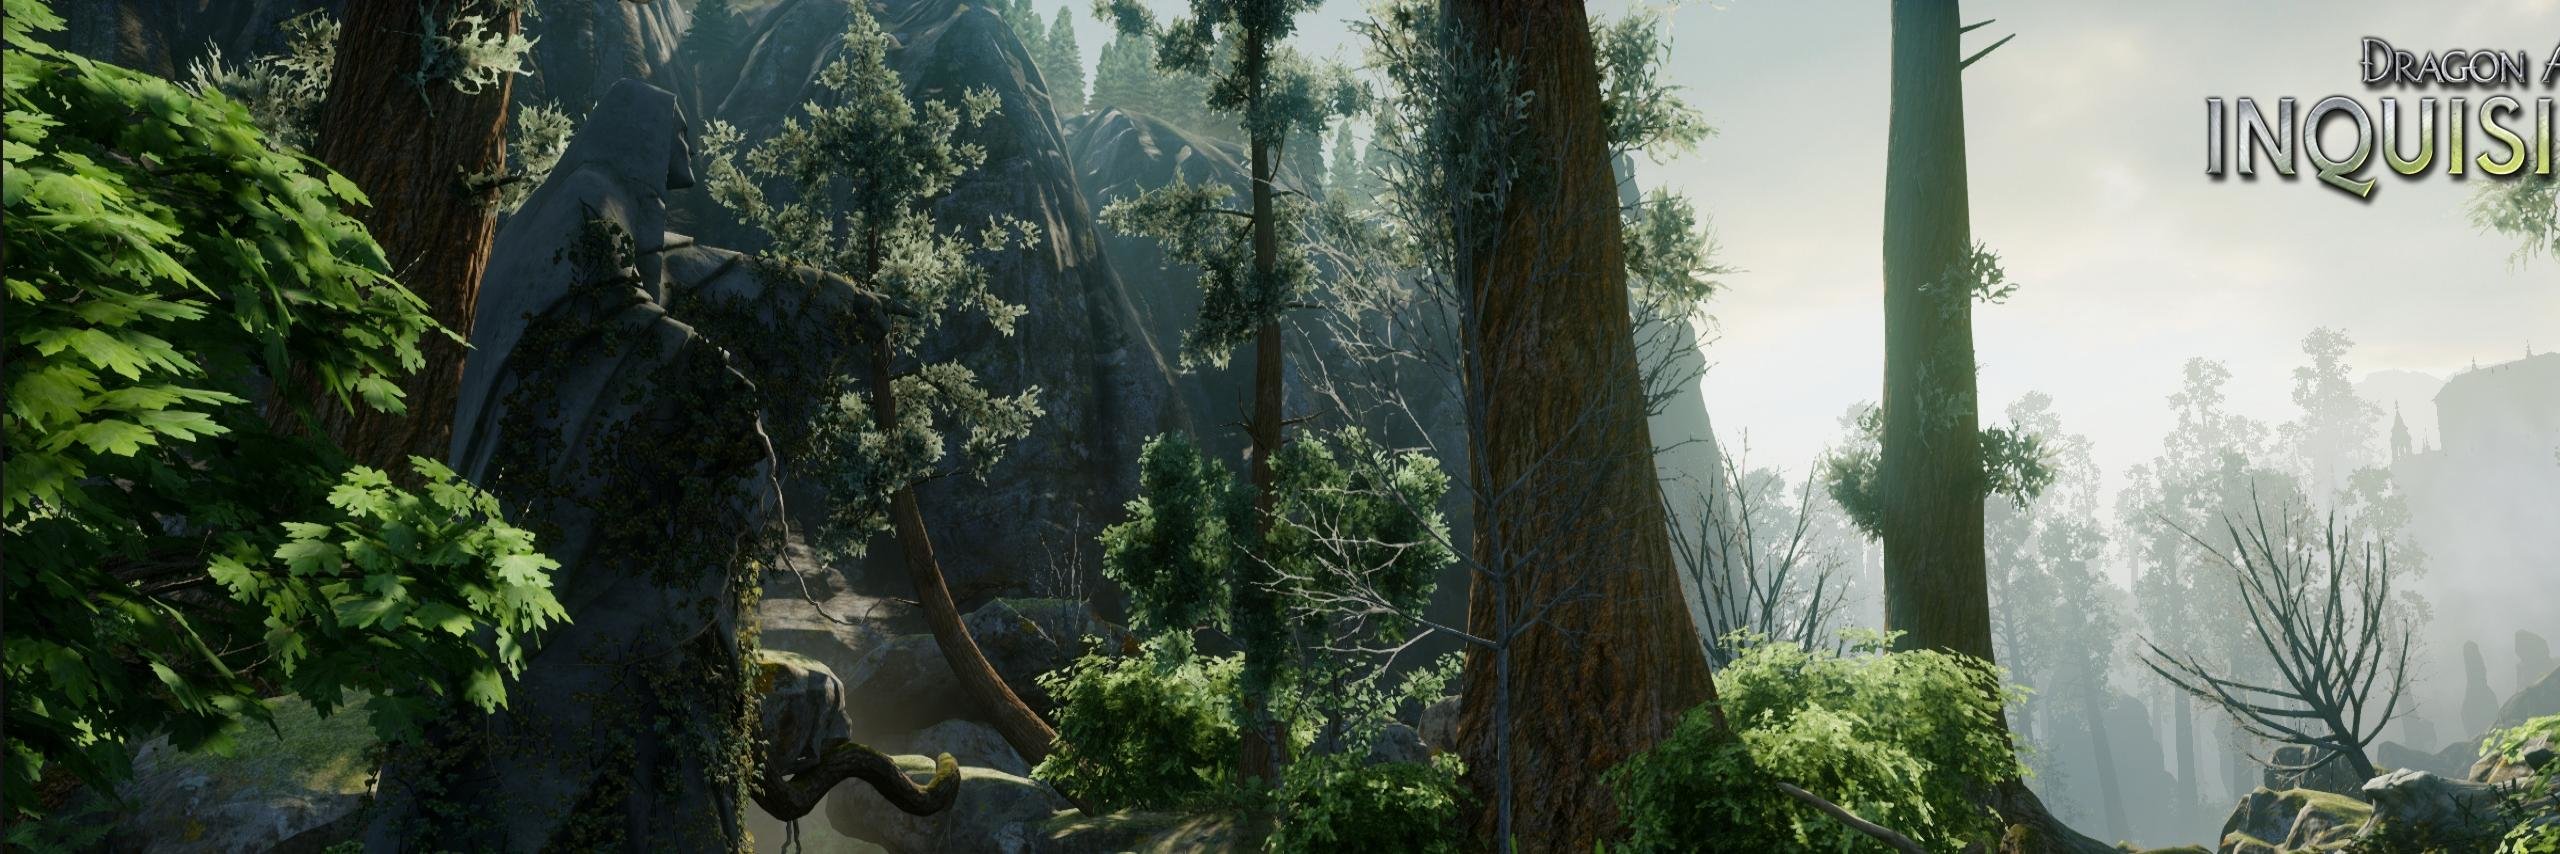 High resolution Dragon Age: Inquisition dual screen 2560x854 wallpaper ID:204579 for desktop